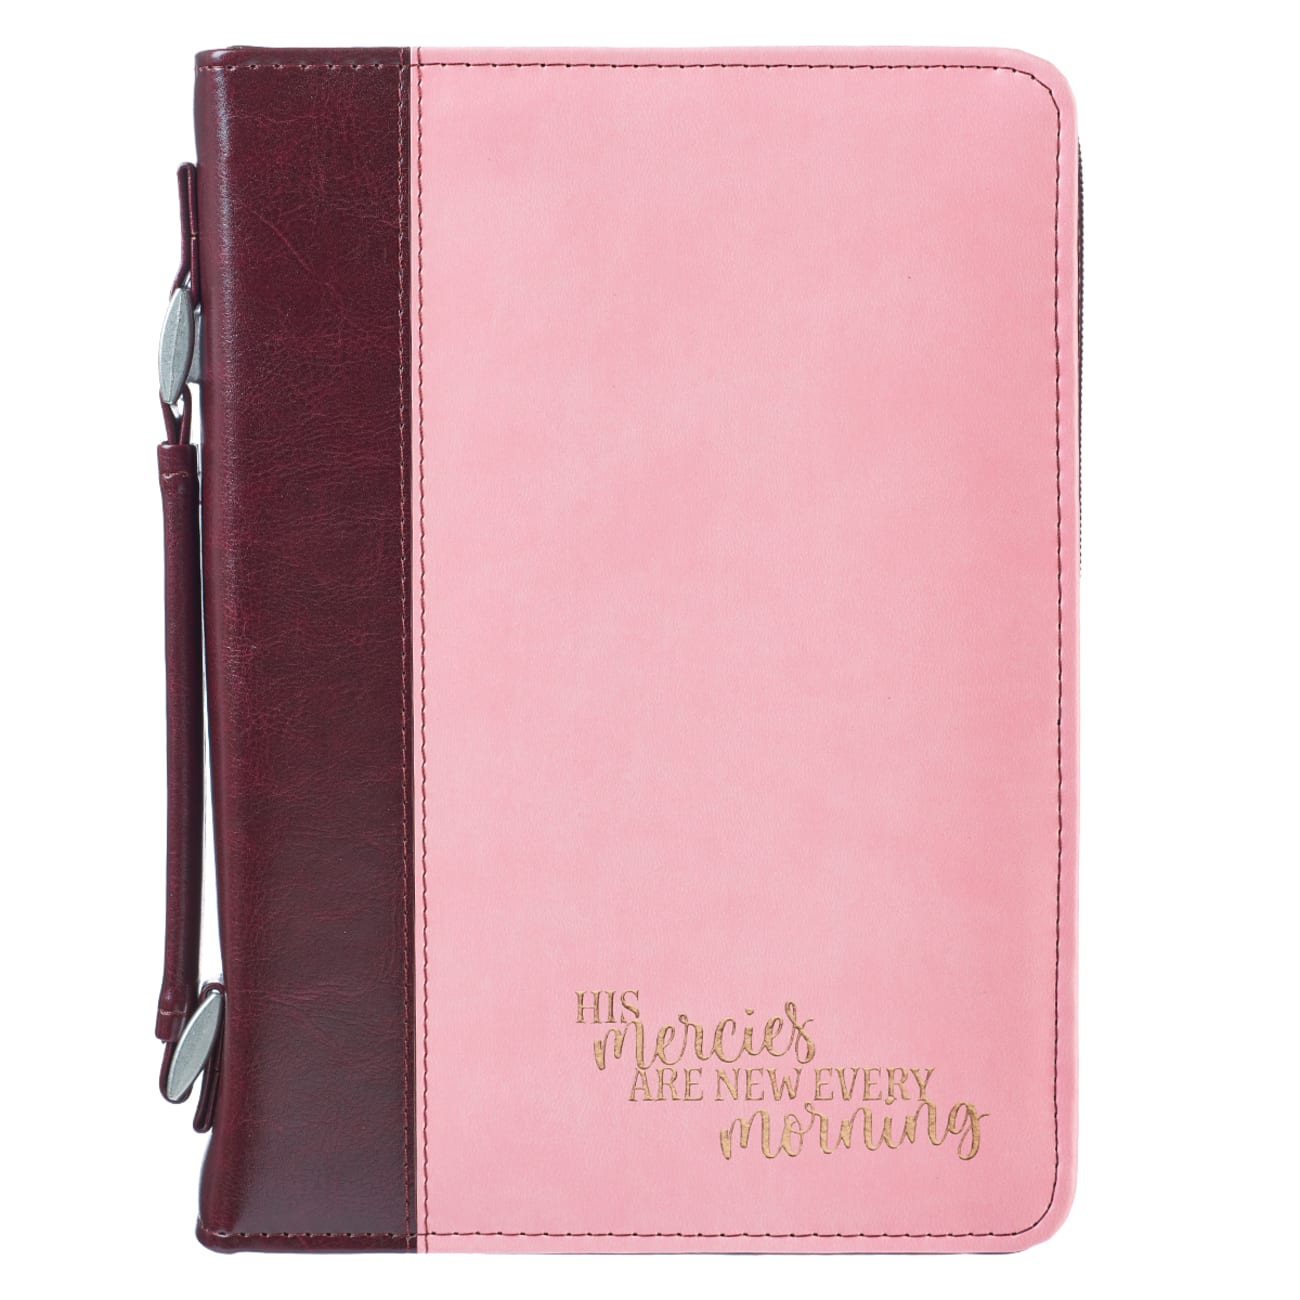 Bible Cover Trendy Medium: His Mercies Are New Every Morning, Pink/Brown, Carry Handle Bible Cover